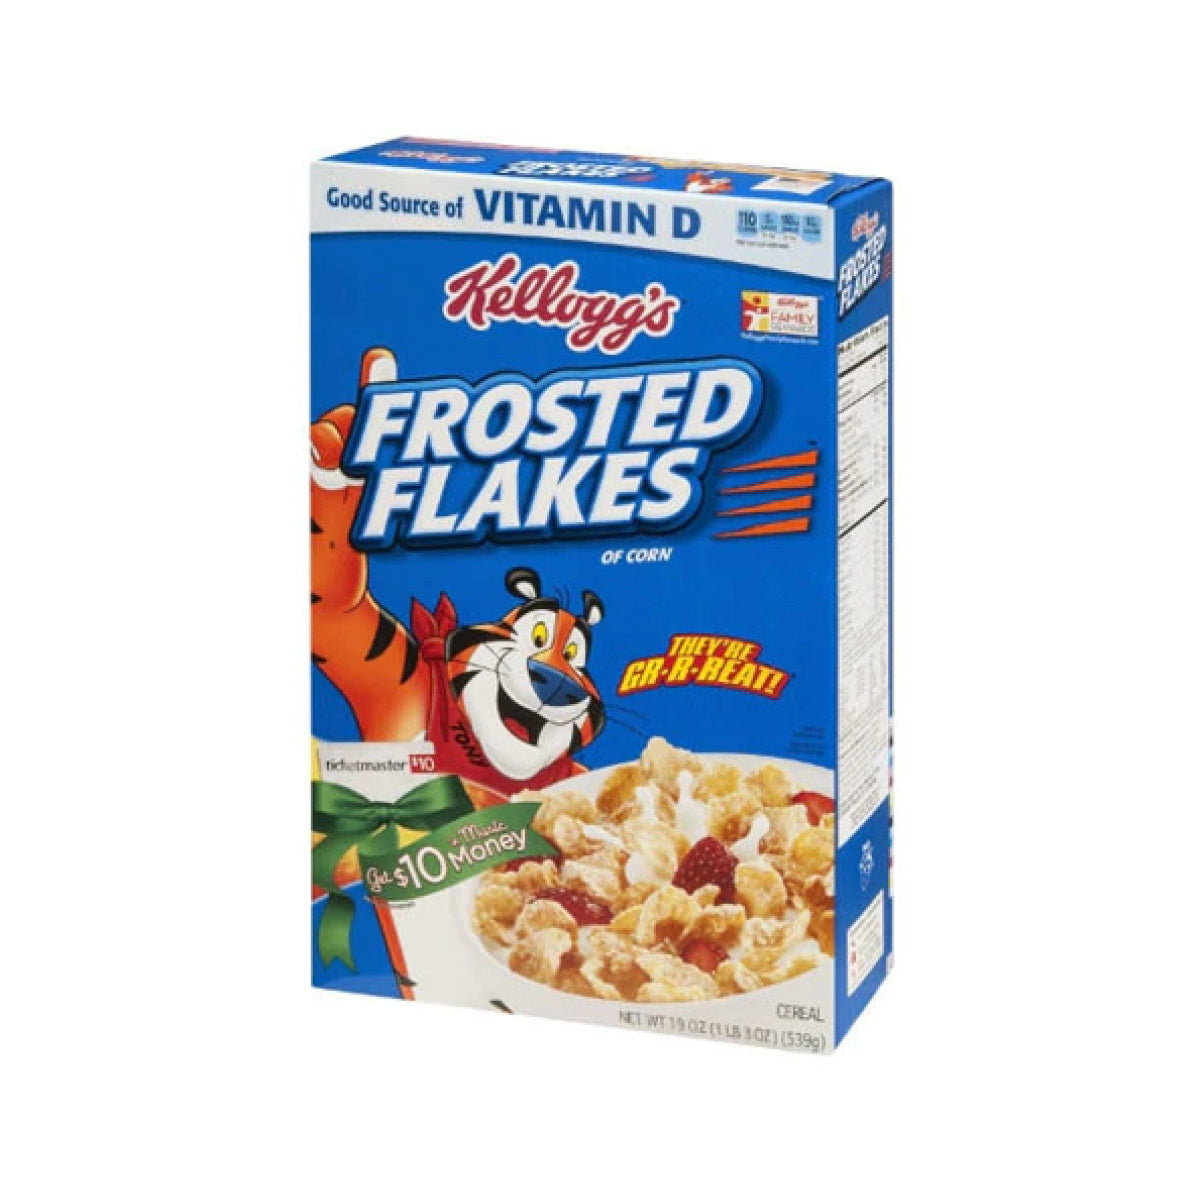 Kellogg's Frosted Flakes, 425g